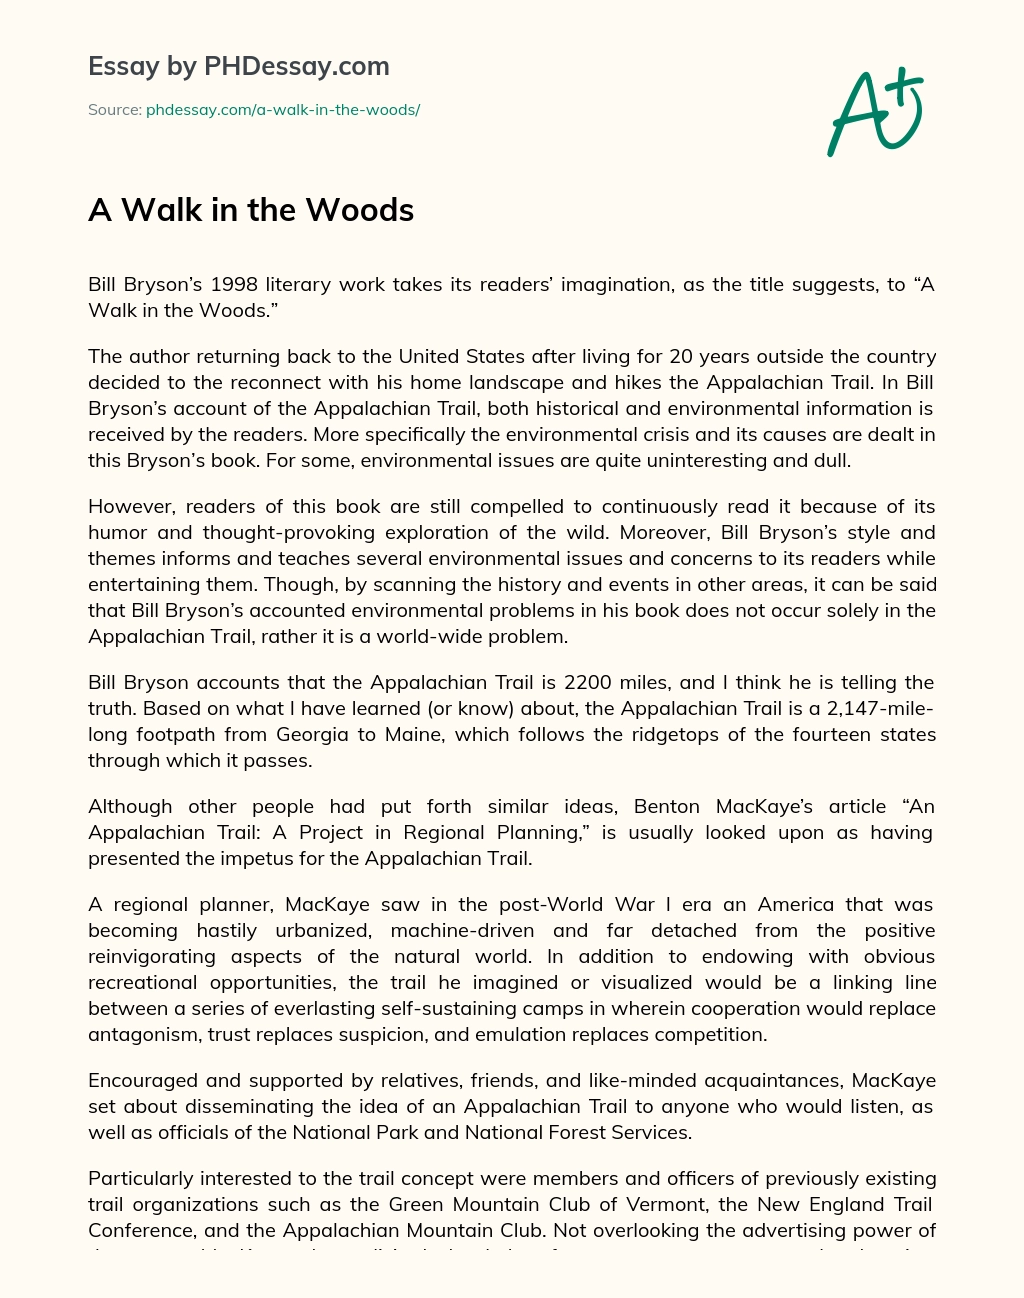 A Walk in the Woods essay